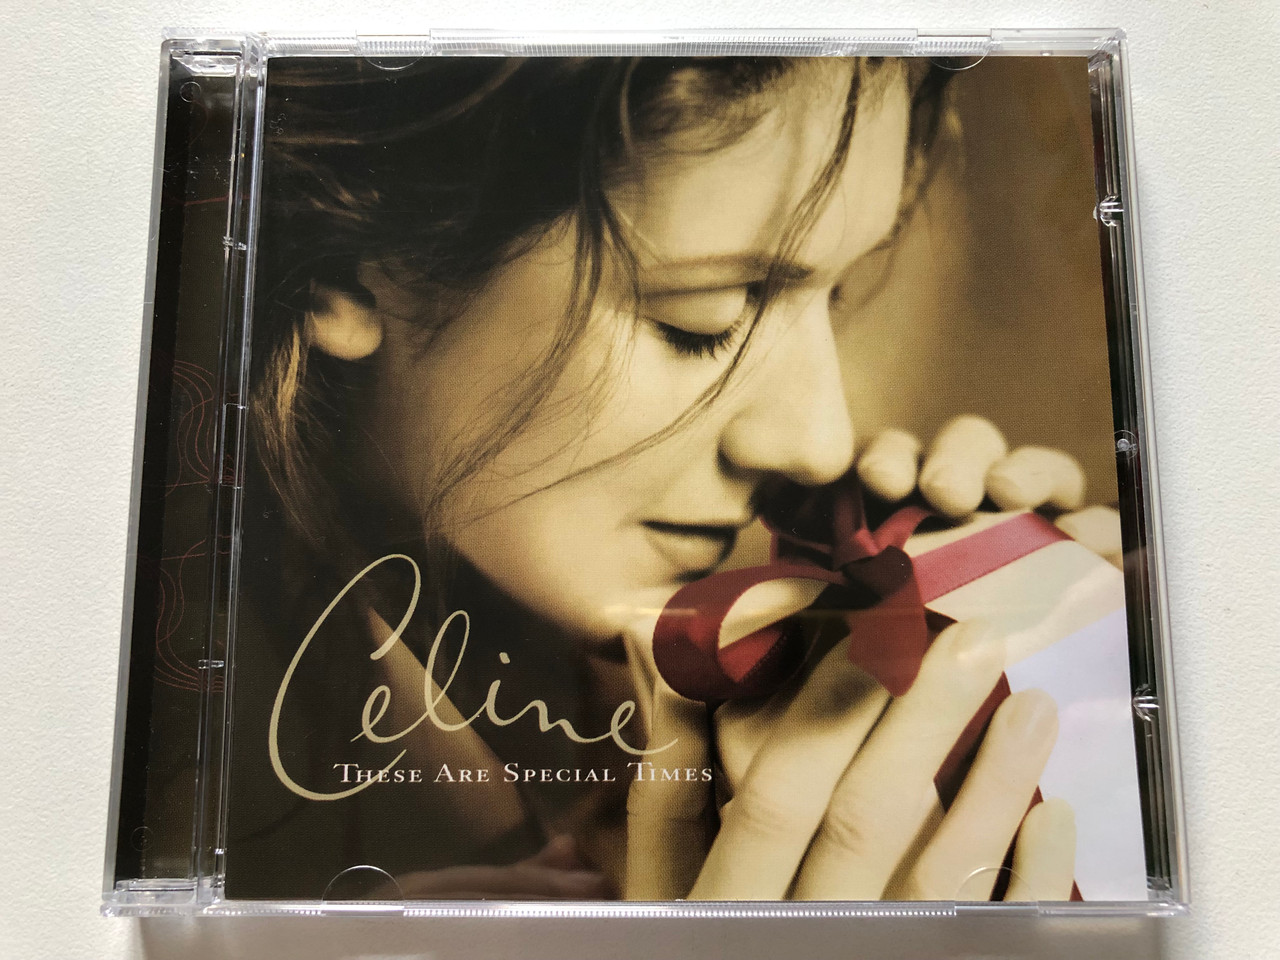 https://cdn10.bigcommerce.com/s-62bdpkt7pb/products/0/images/312681/Celine_Dion_These_Are_Special_Times_Columbia_Audio_CD_1998_492730_2_1__12743.1700110465.1280.1280.JPG?c=2